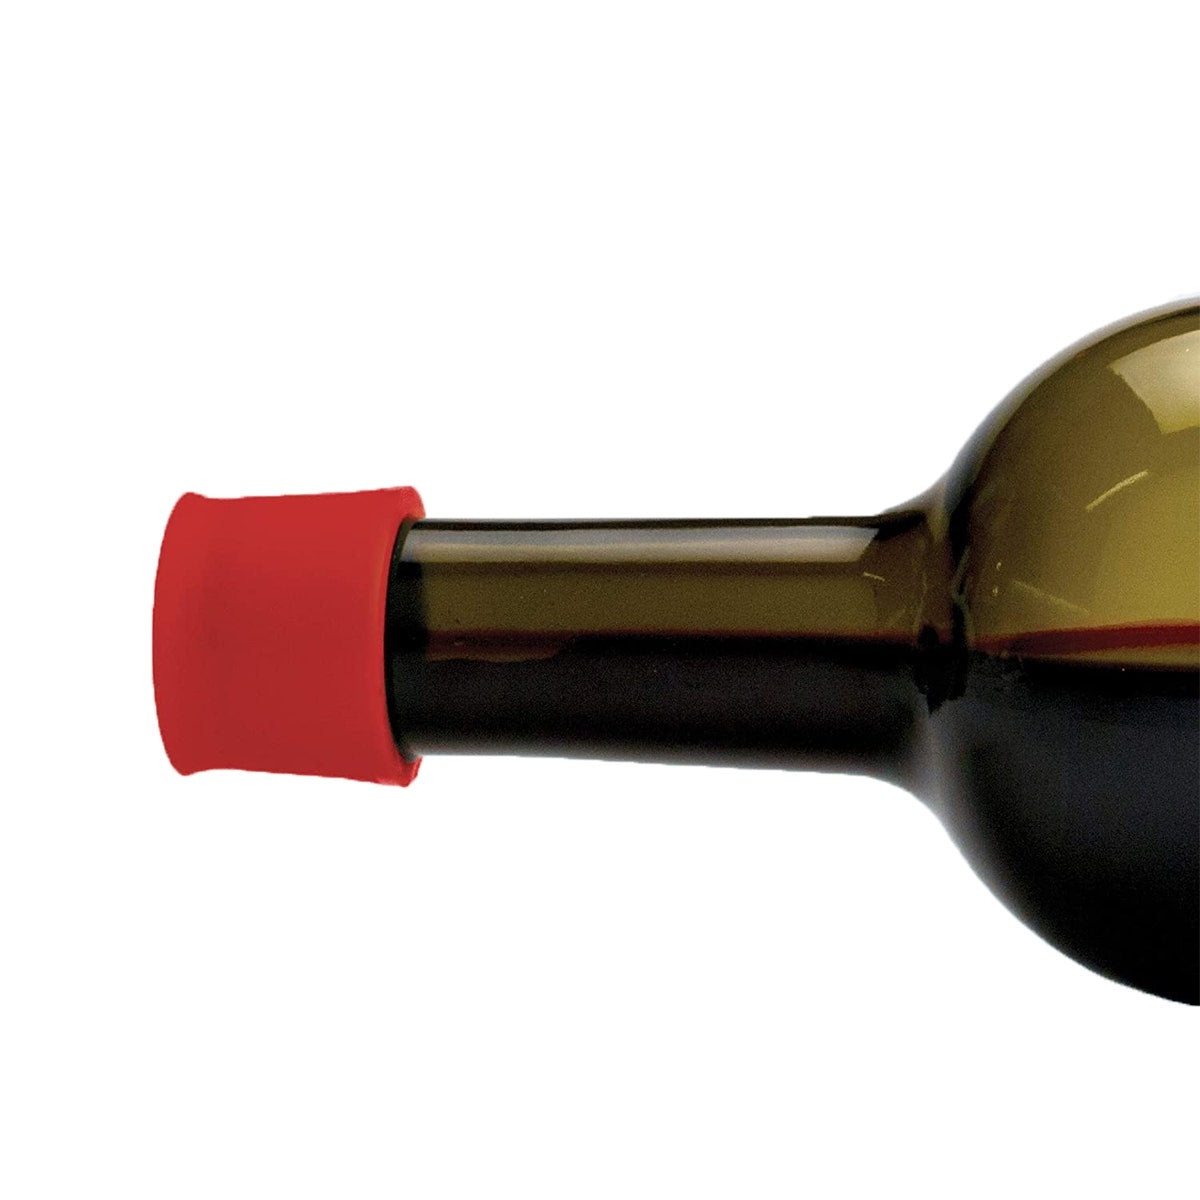 These silicone top hat wine stoppers will keep your wine fresher